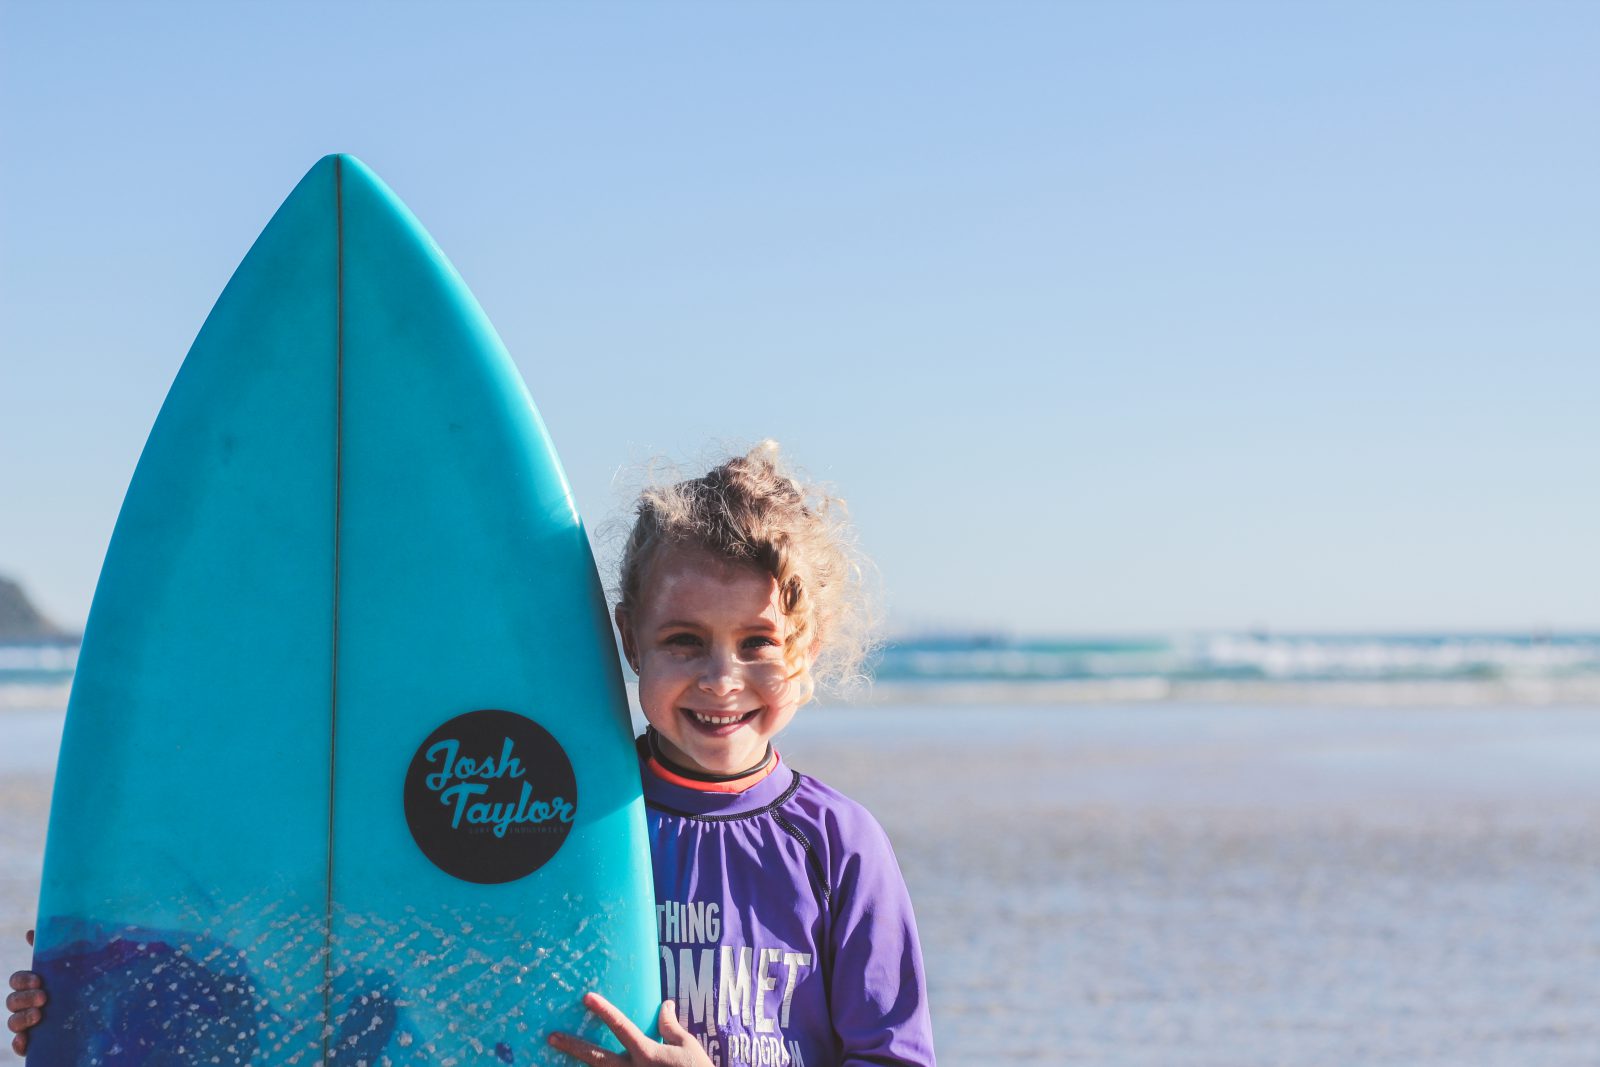 SURF’S UP, FOR KIDS